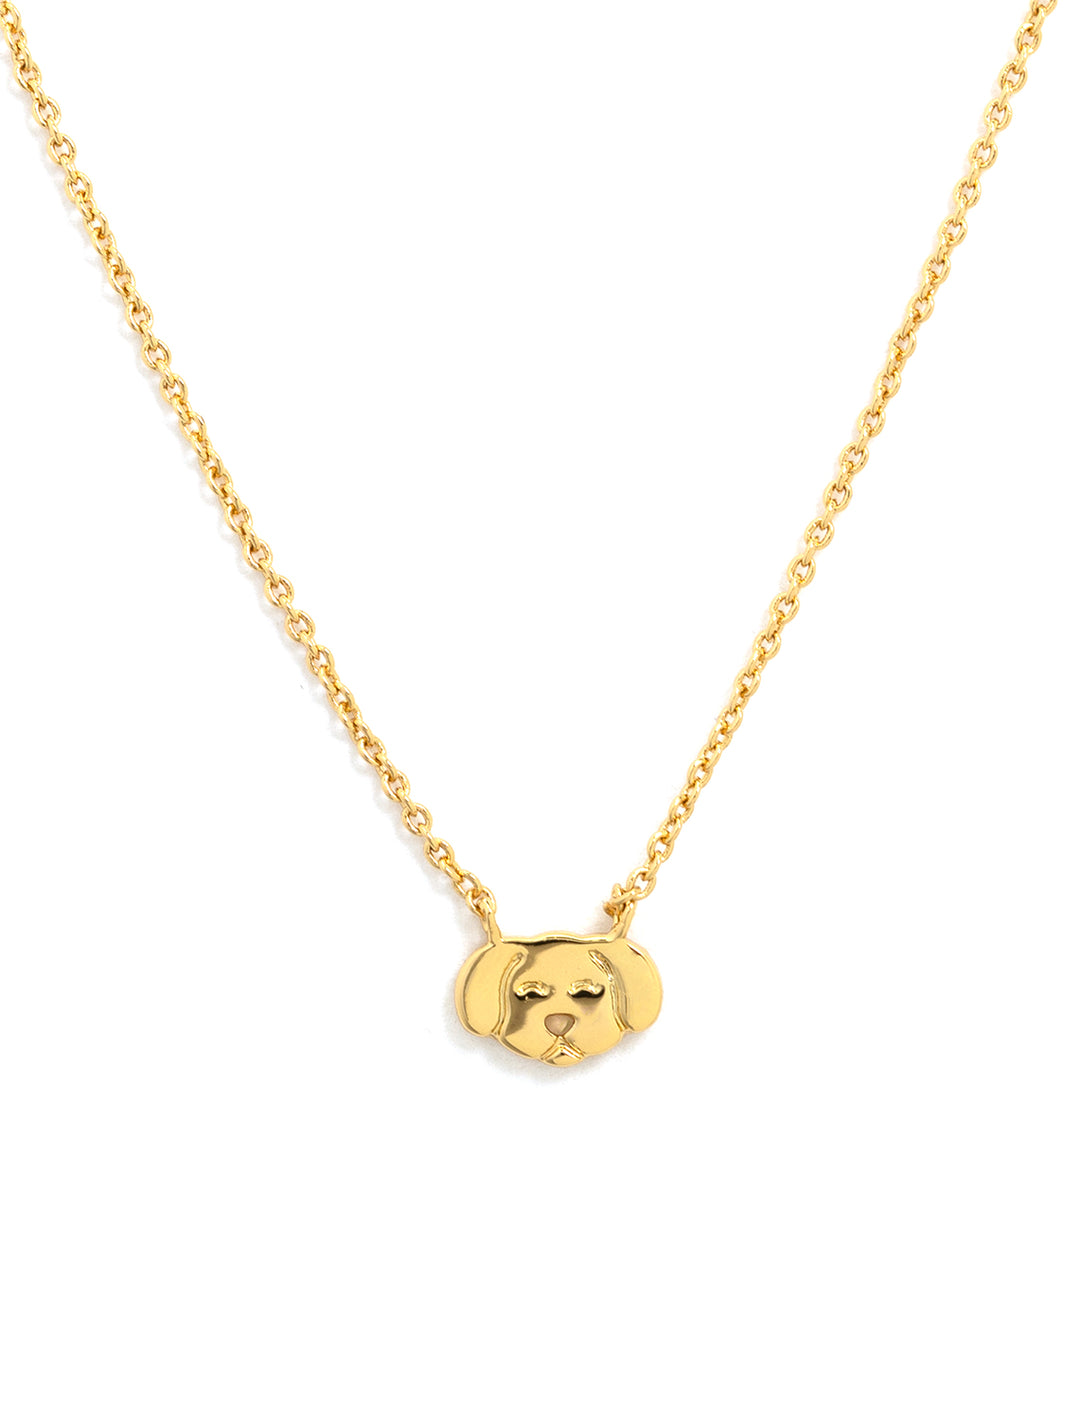 Front view of Tai's dog necklace in gold.